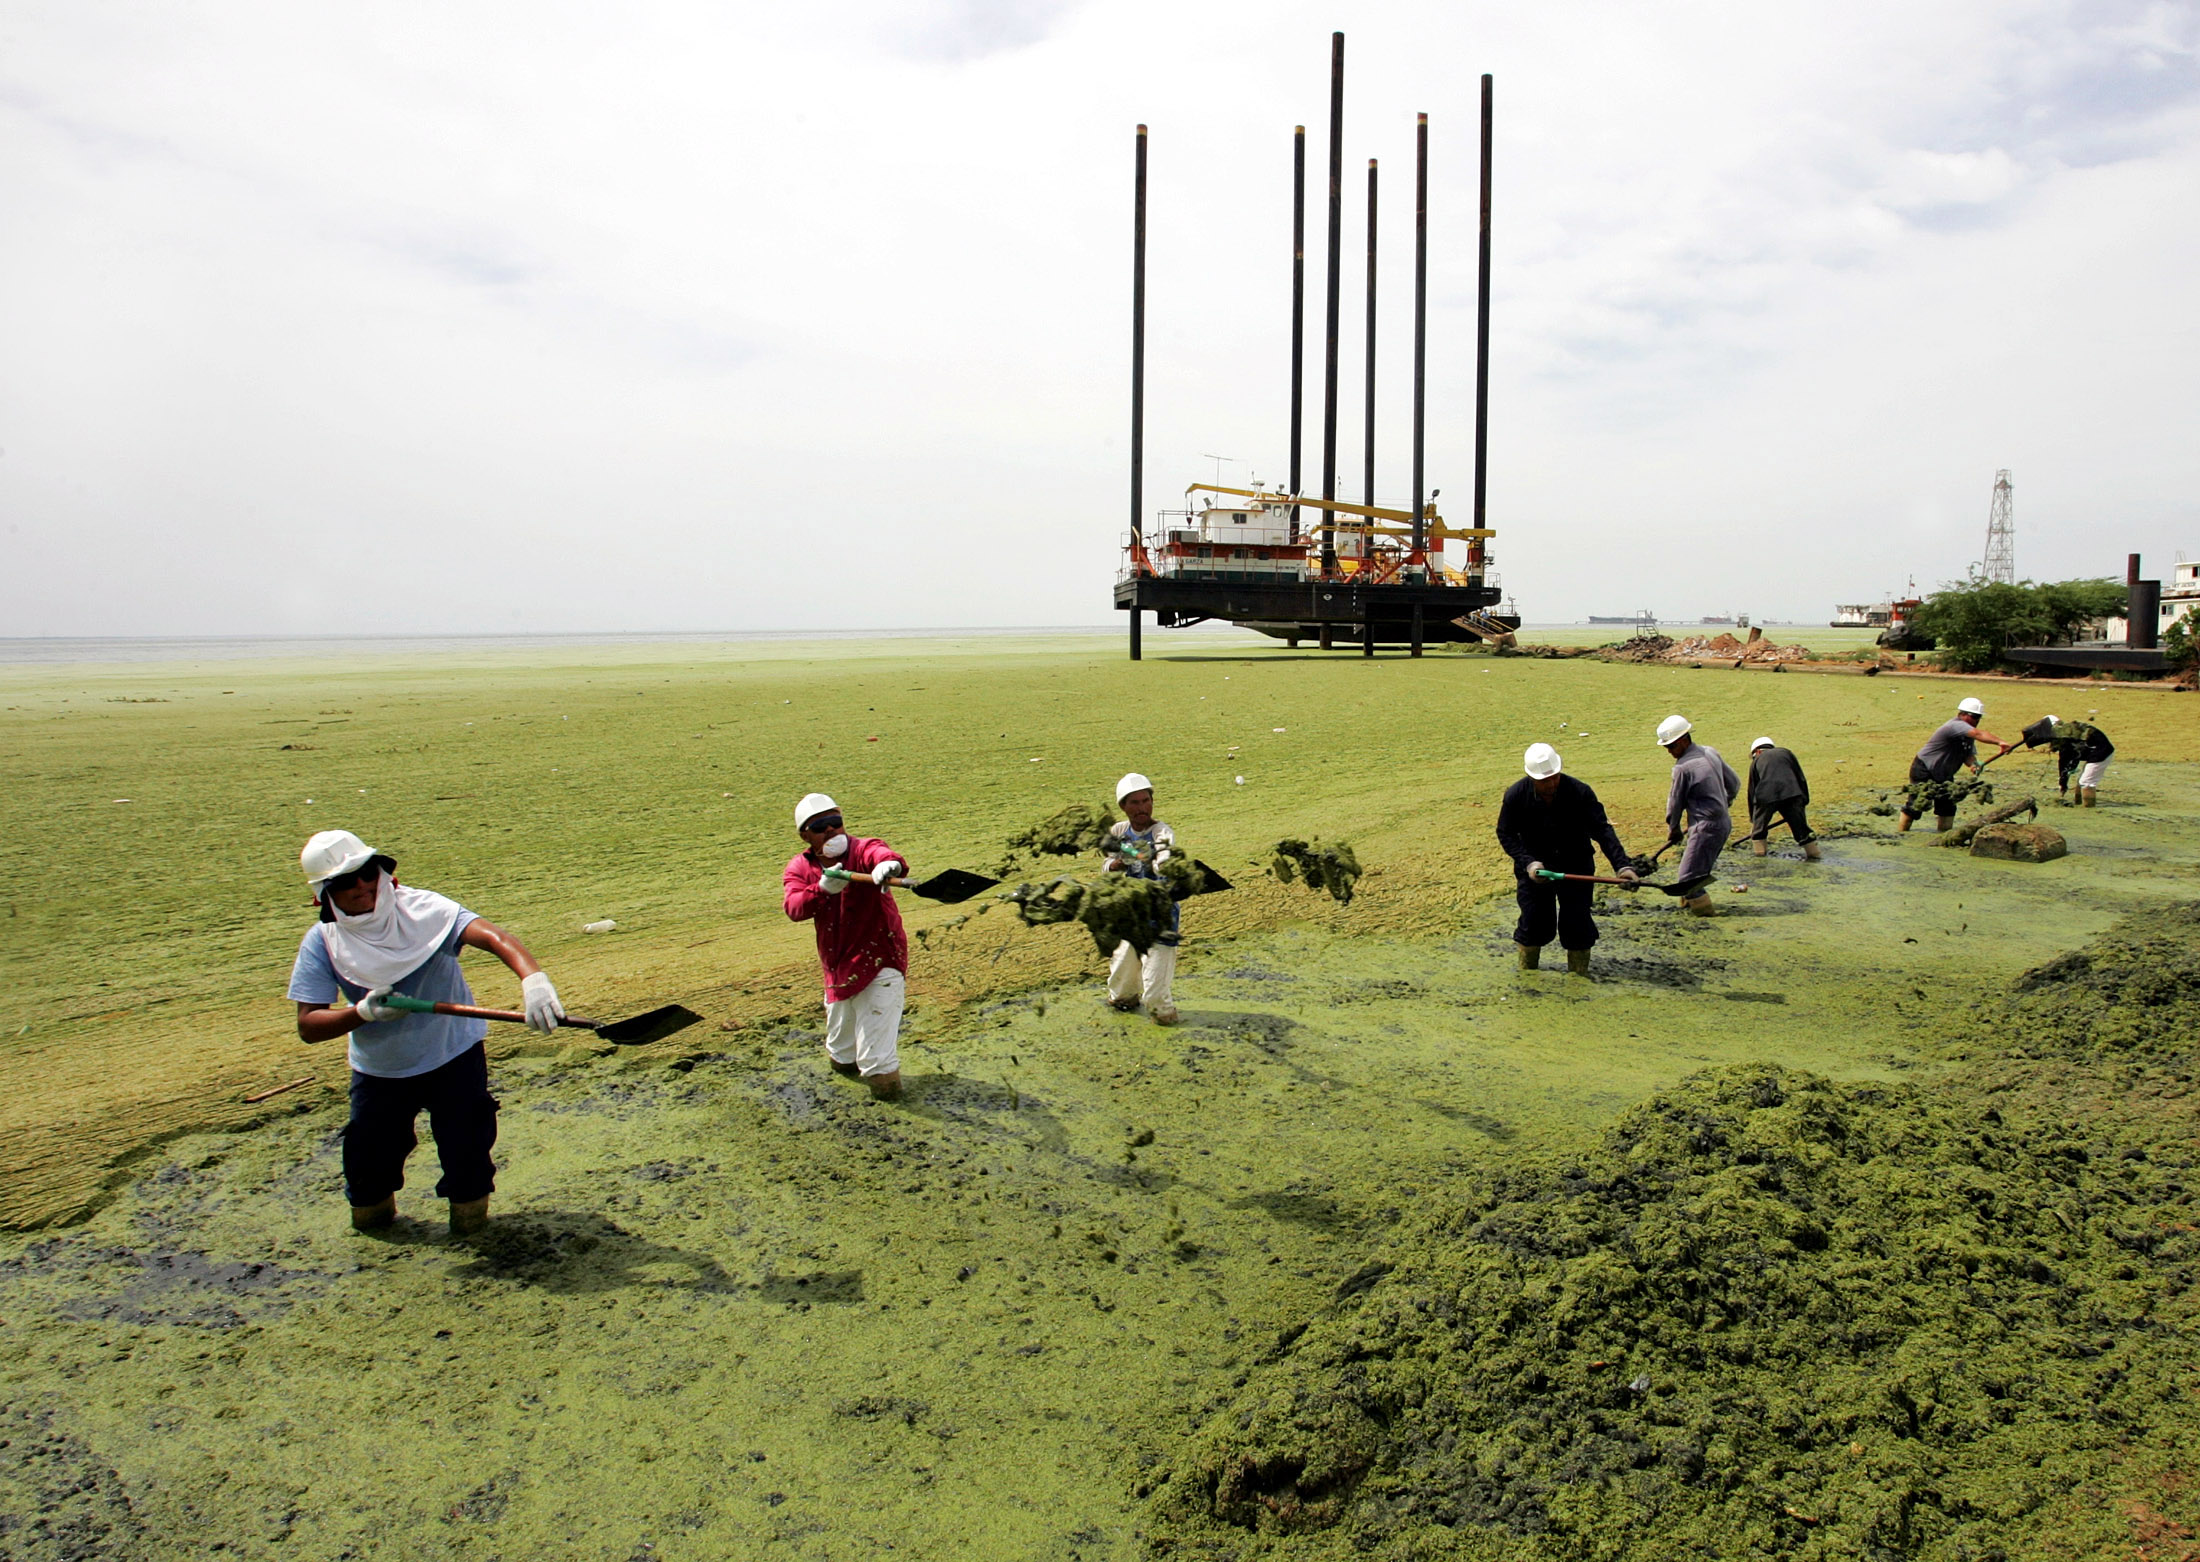 WORKERS CLEAN UP AT THE POLLUTED MARACAIBO LAKE IN VENEZUELA.